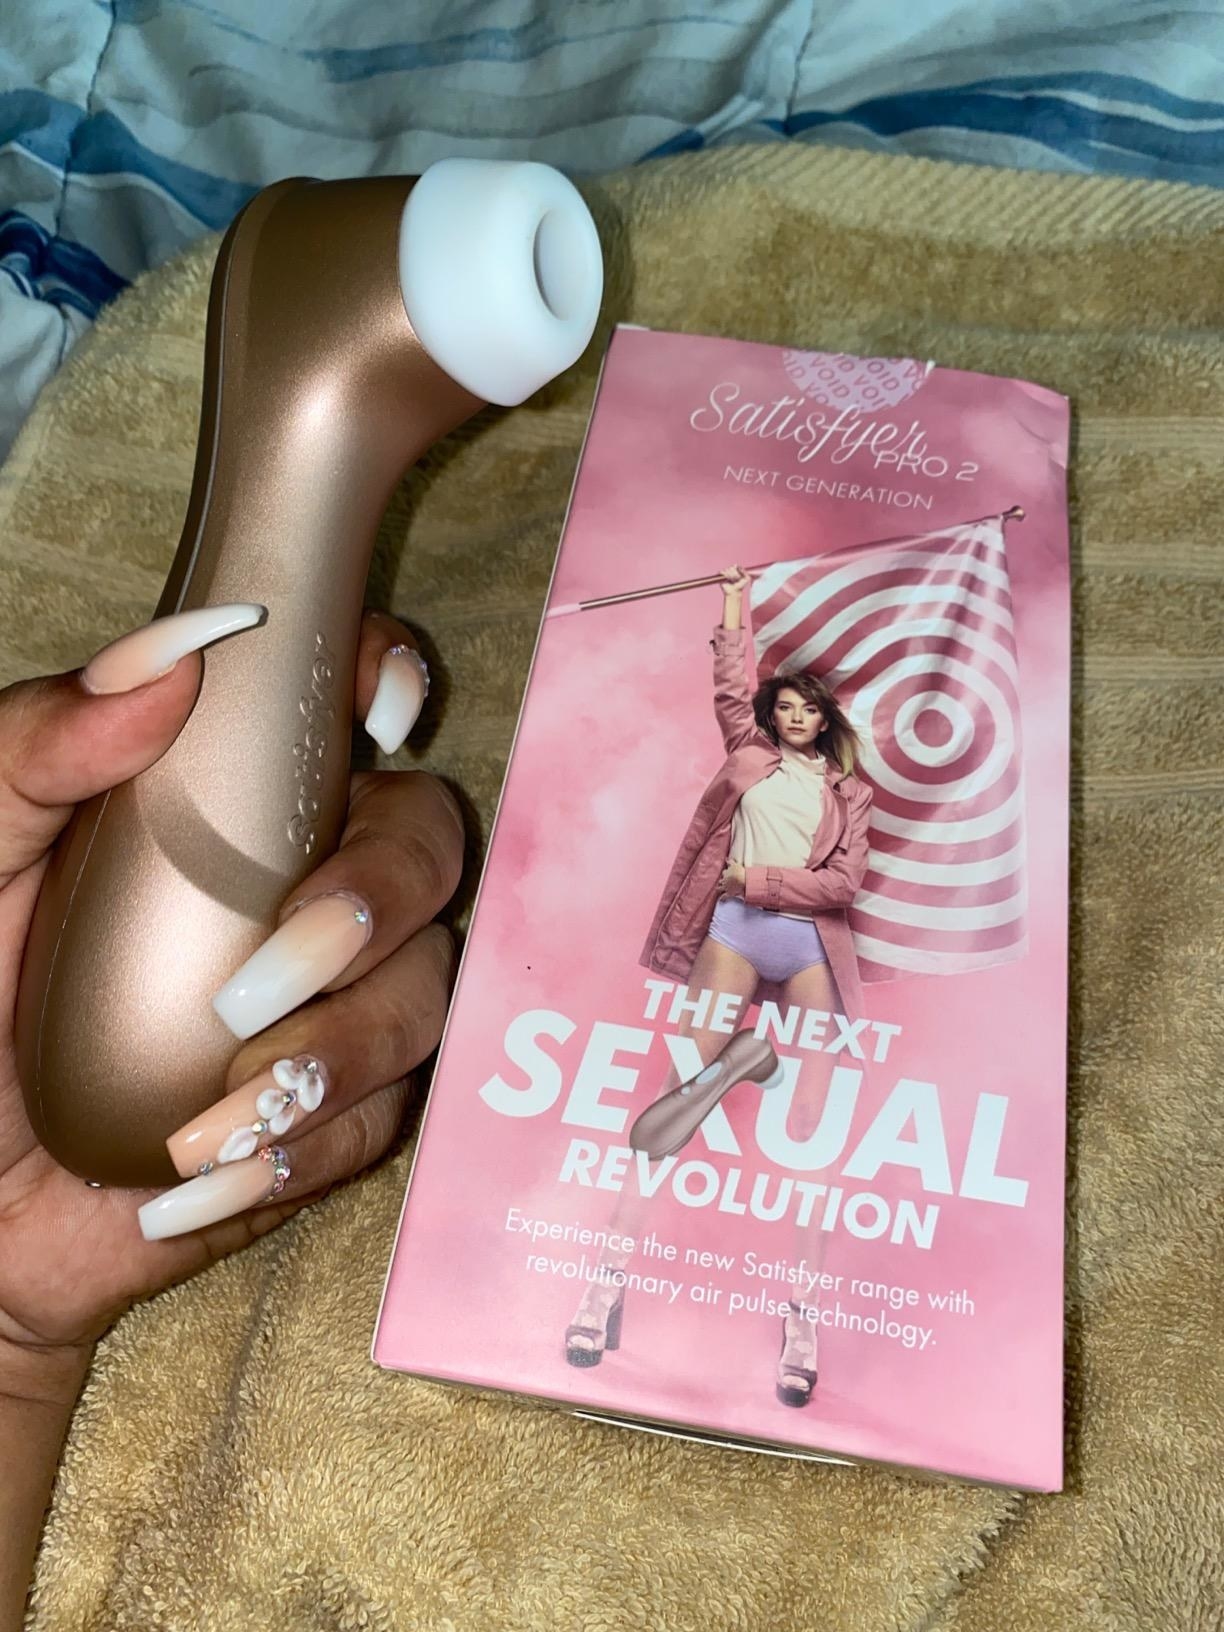 Model holding rose gold suction vibrator next to pink box